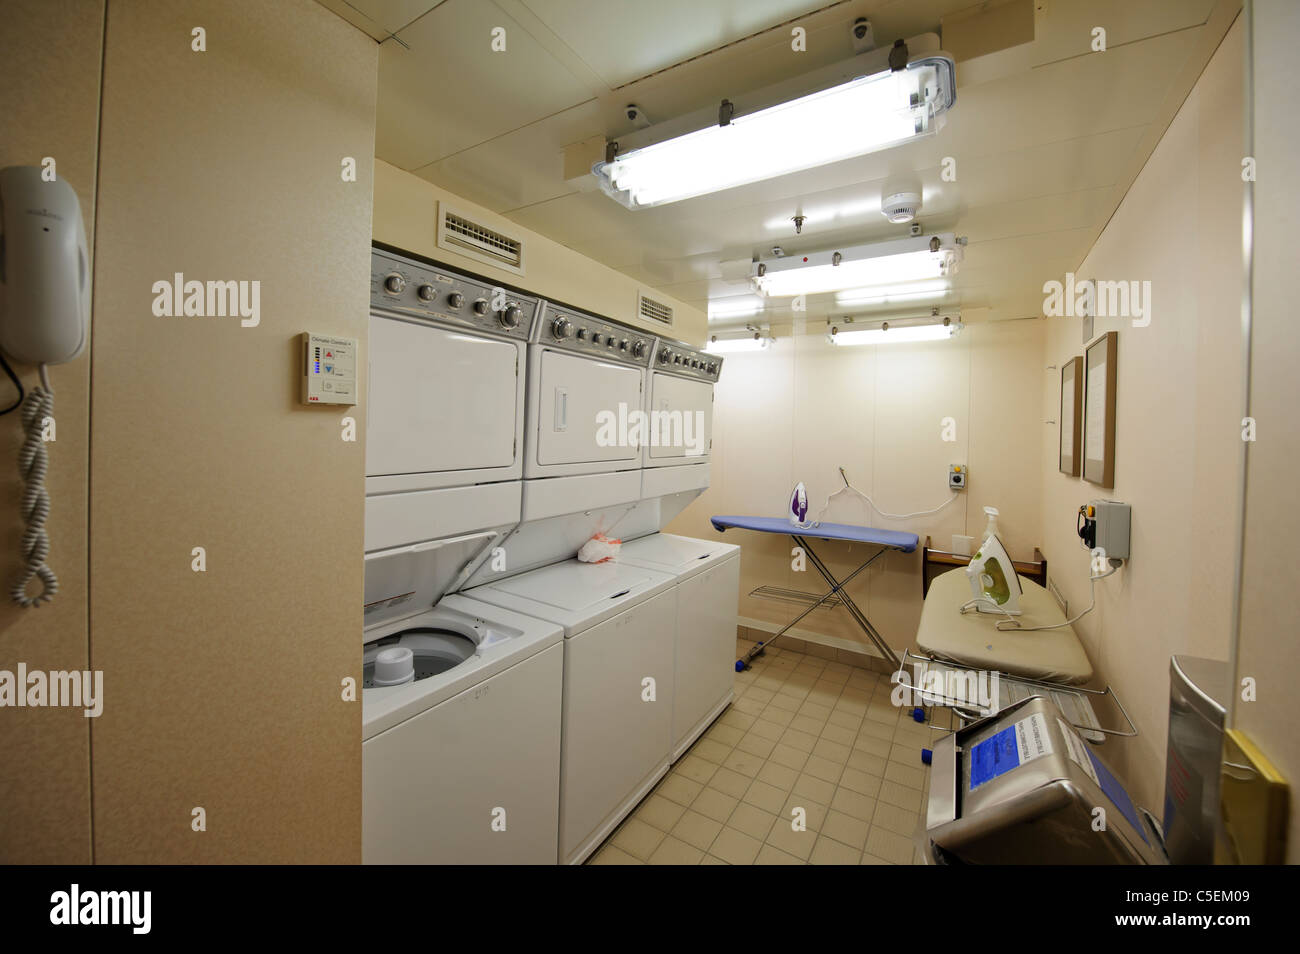 Laundry Room Deck 4 Queen Mary 2 Cruise Ship Stock Photo